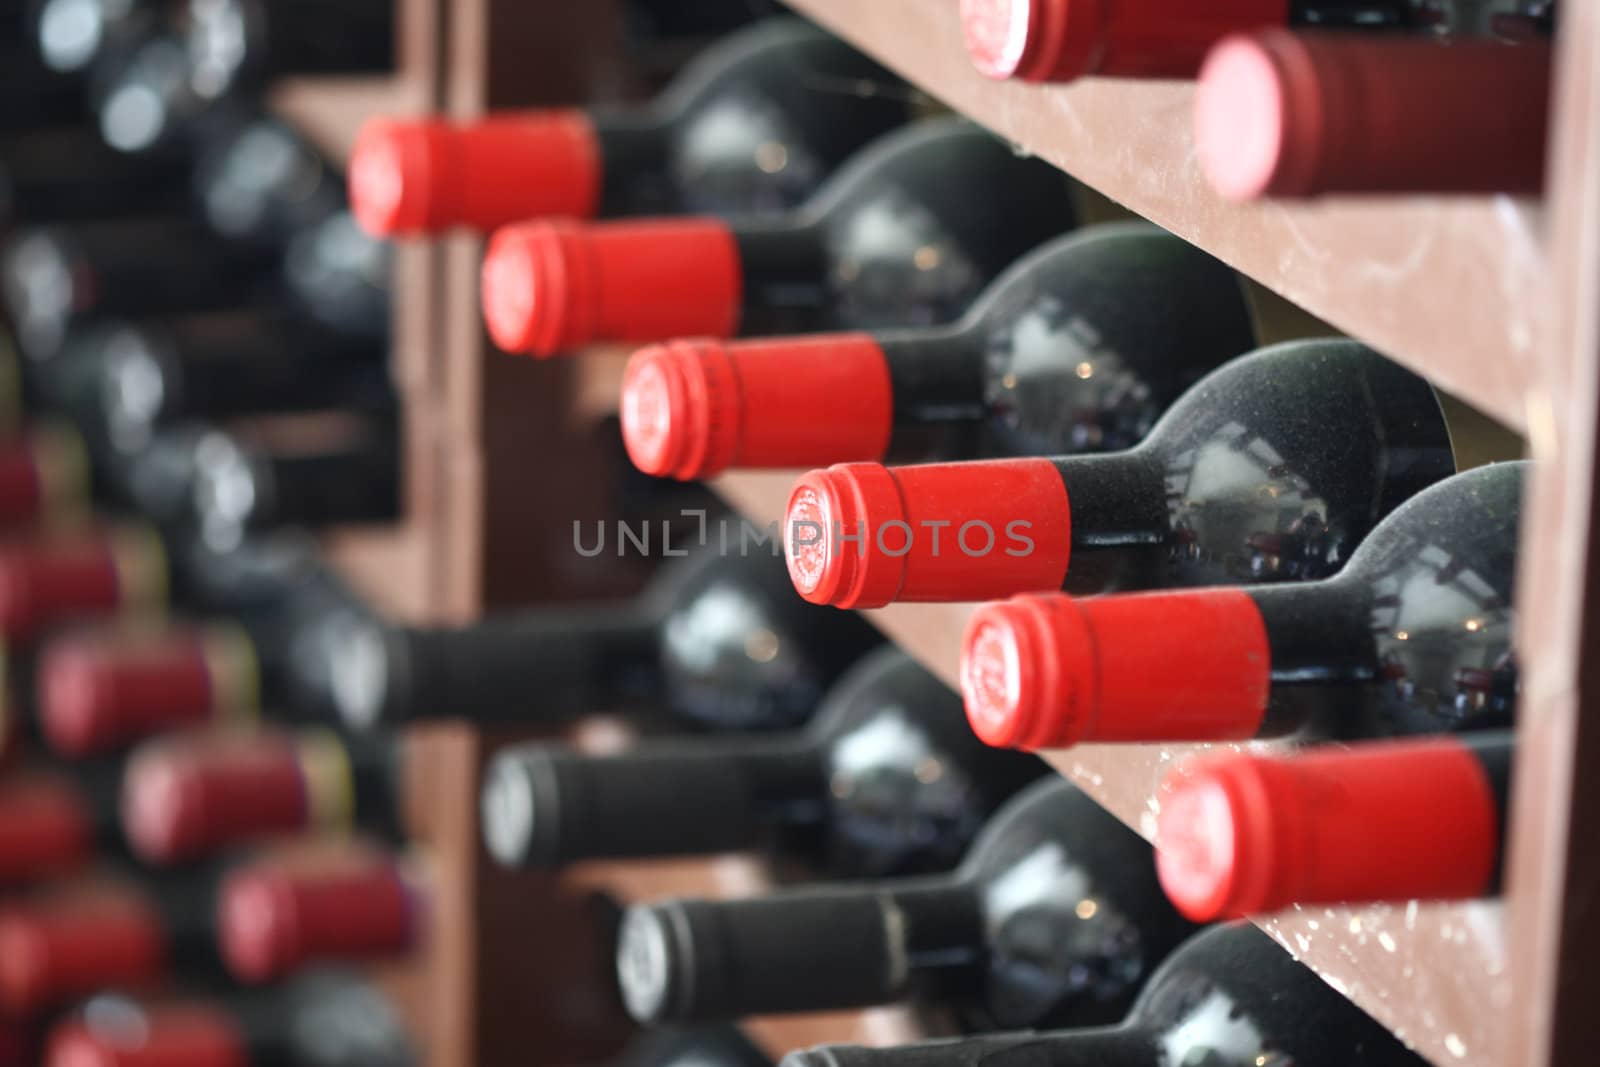 Redwine bottles with red caps in a cellar